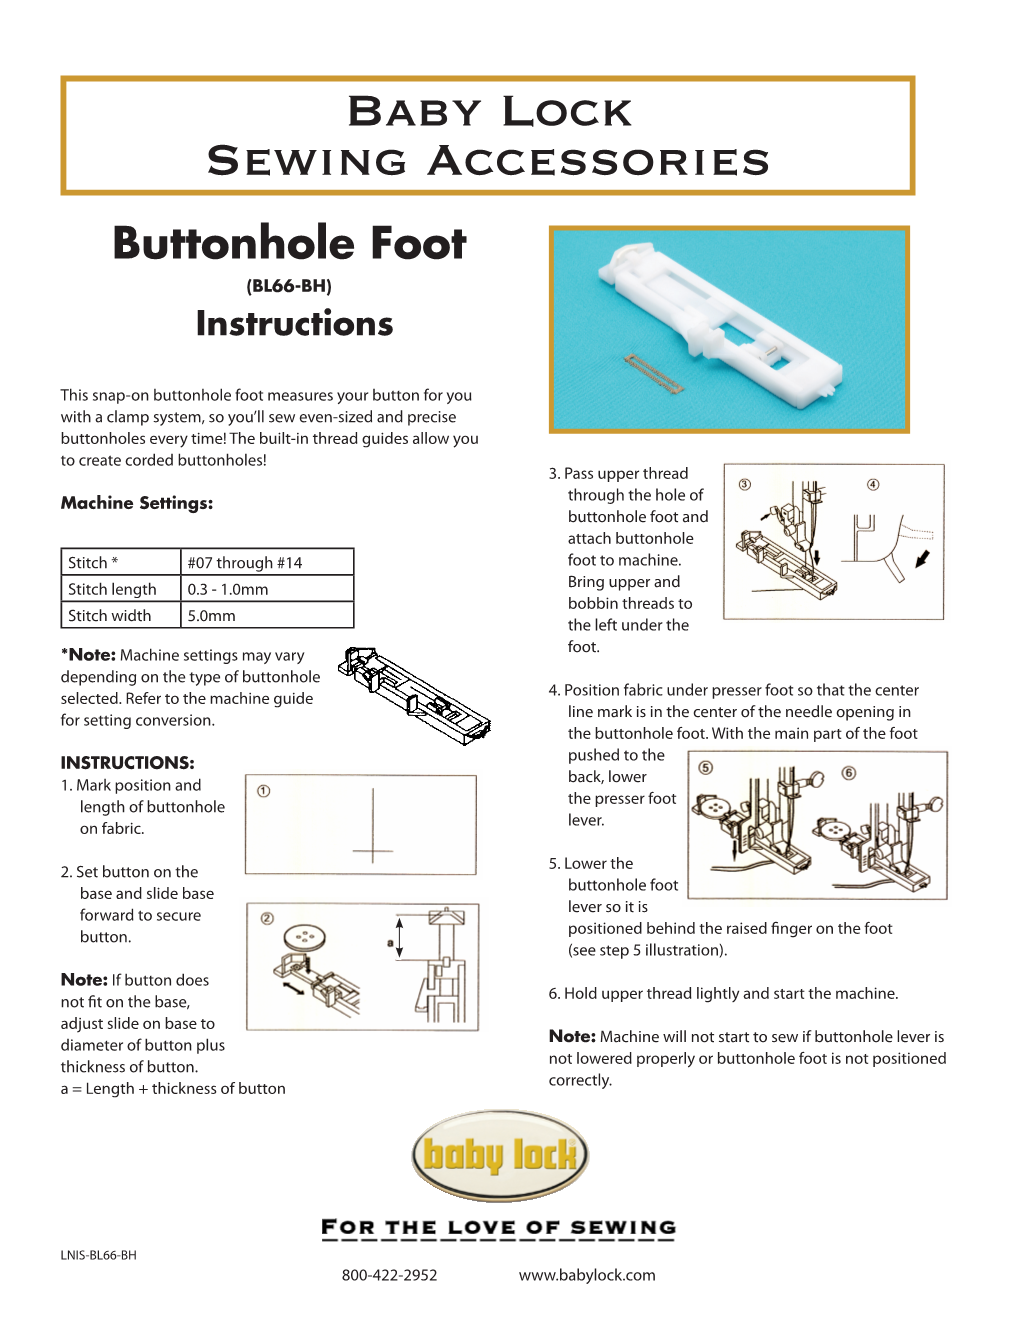 Baby Lock Sewing Accessories Buttonhole Foot (BL66-BH) Instructions